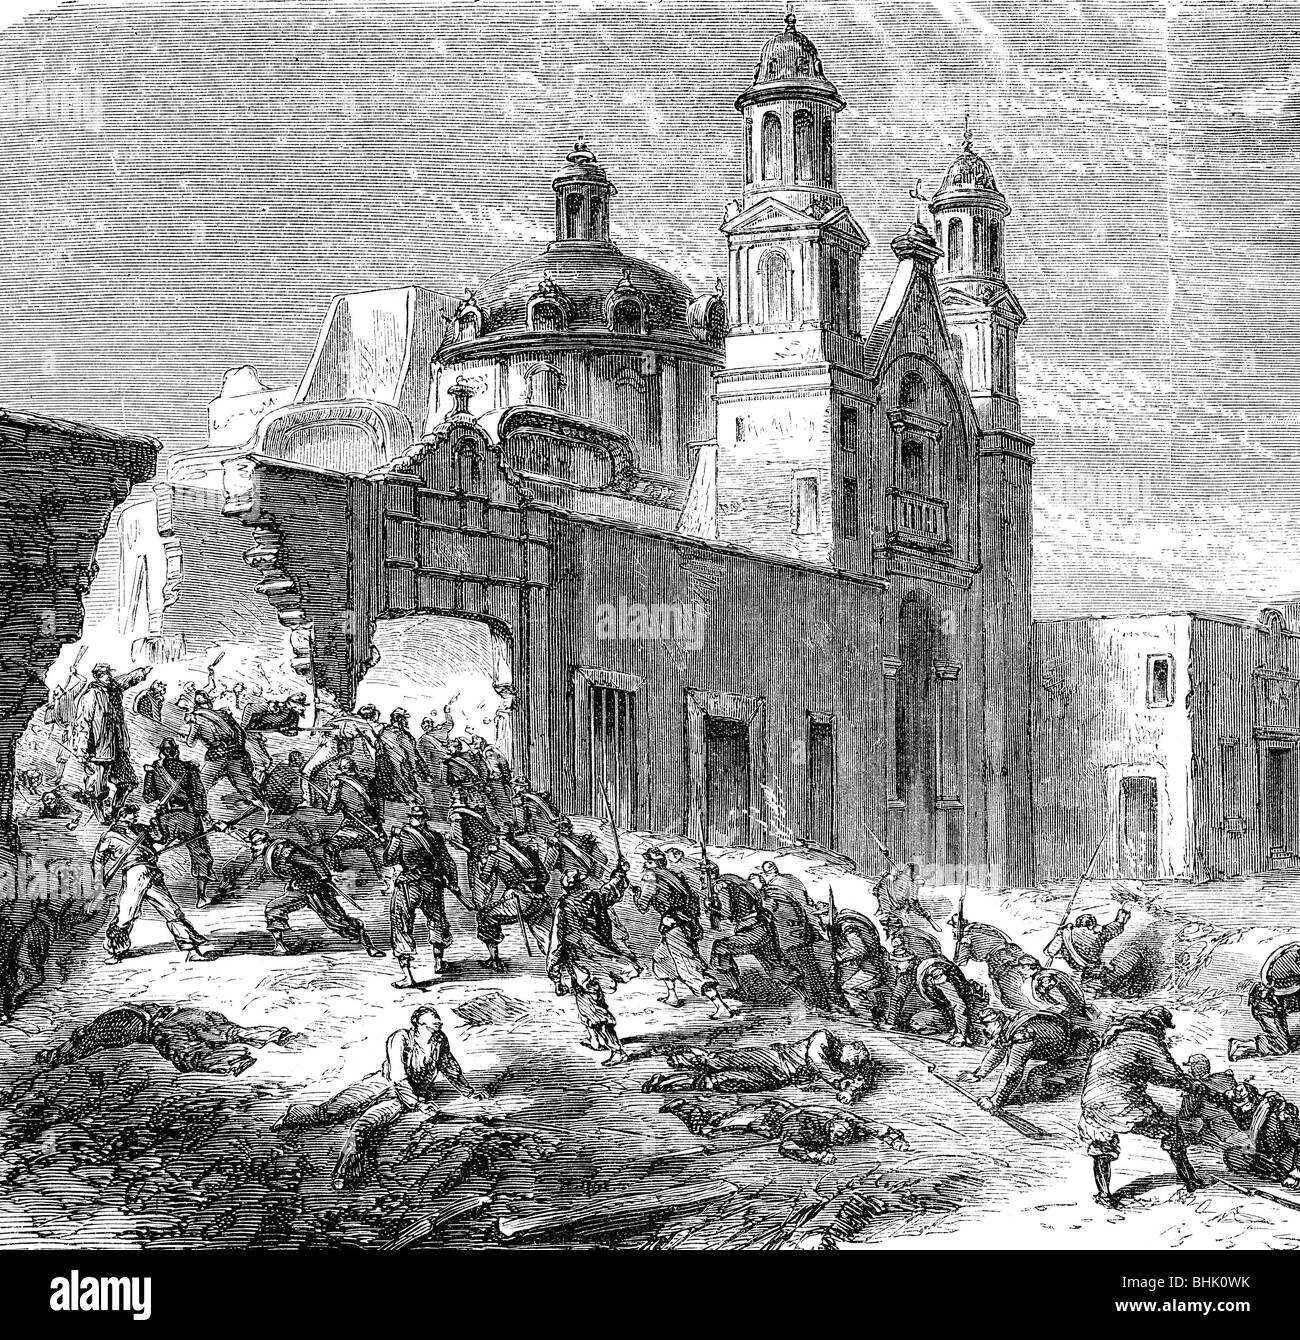 geography / travel, Mexico, French Intervention 1861 - 1867, siege of Puebla 18.3. - 17.5.1863, French soldiers storming Penitenciario, 19th century, historic, historical, Mexican, Central America, revolution, military engagement, Second Empire, revolt, colonial infantry, attack, war, CEAM, people, Stock Photo